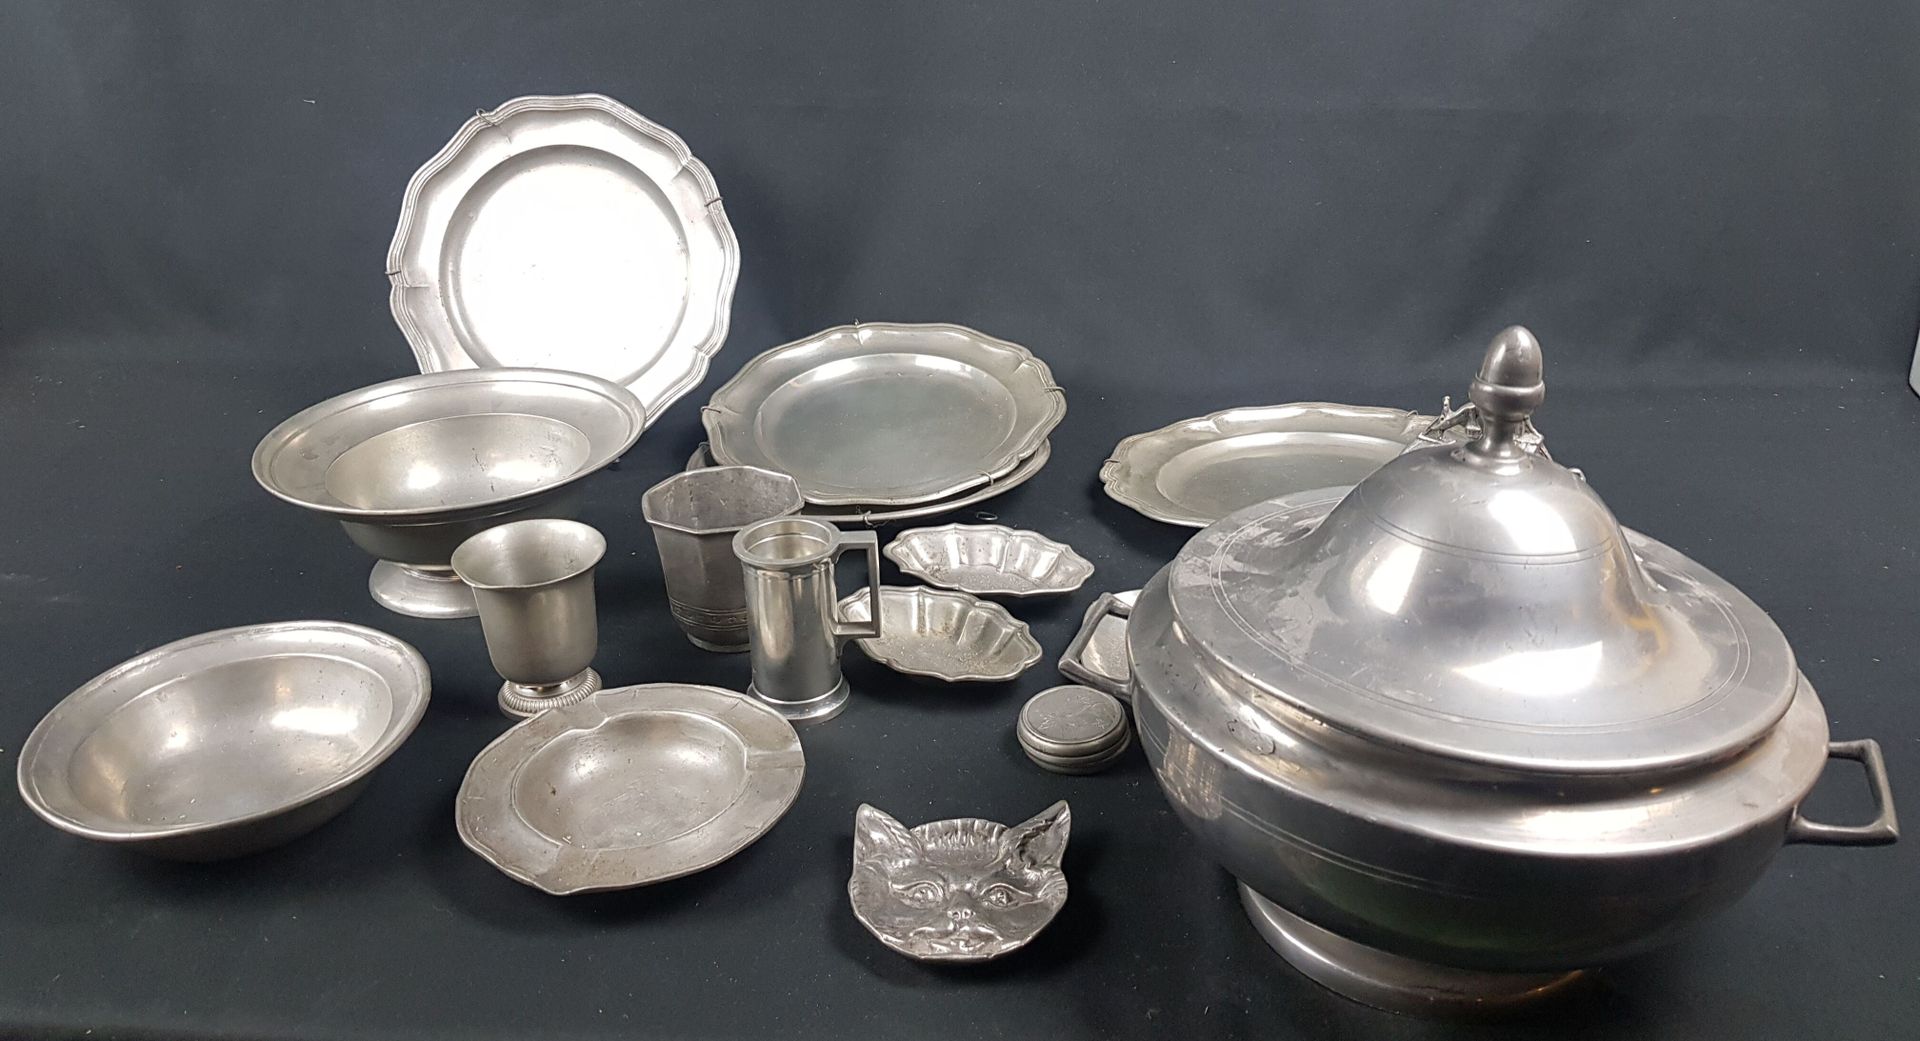 Null LOT of pewter including a tureen, dishes and plates - wear and tear